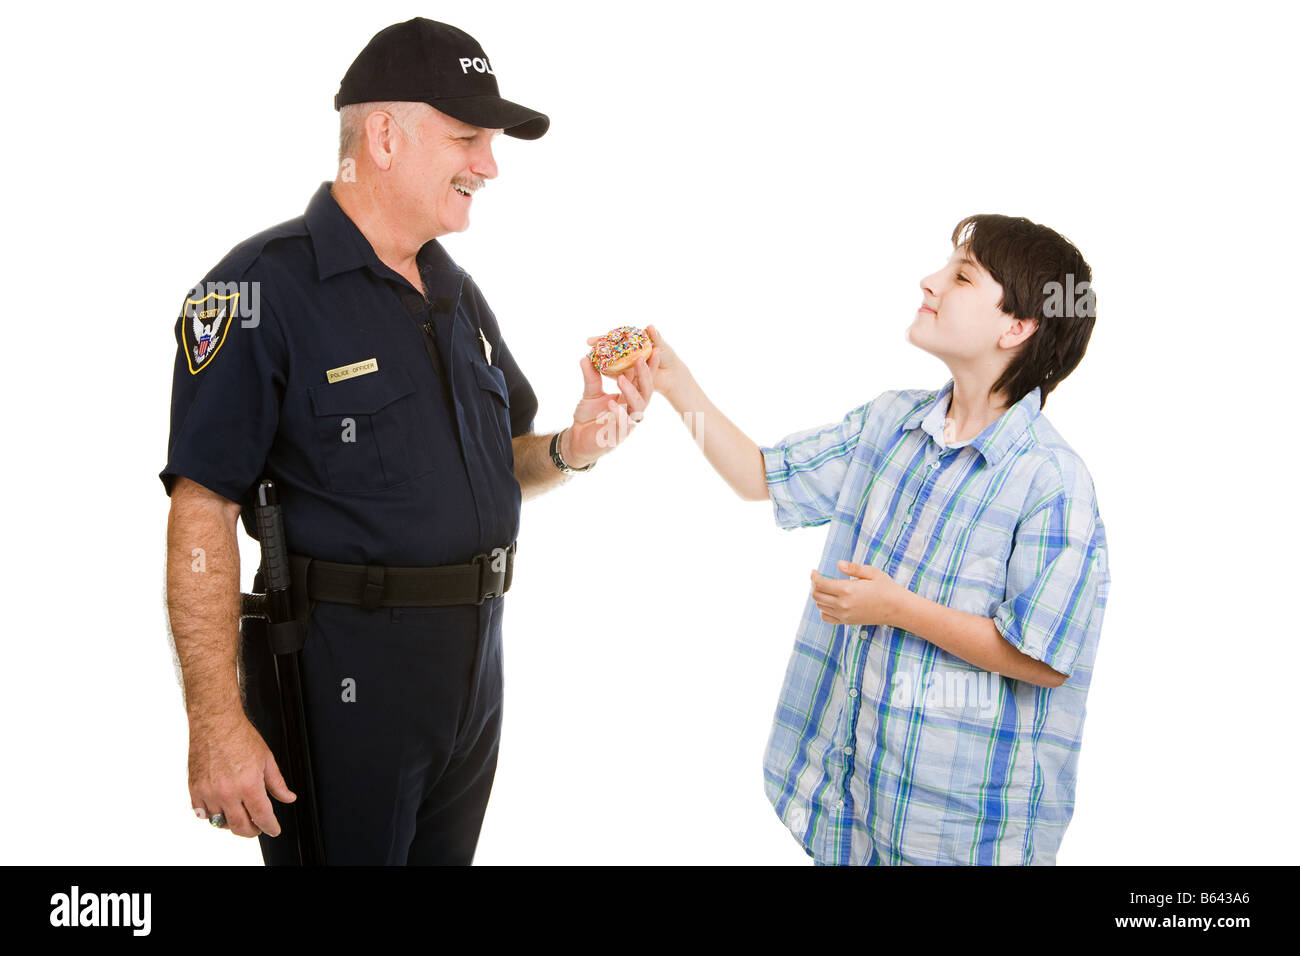 Adolescent boy giving a donut to a police officer Isolated on white Stock Photo